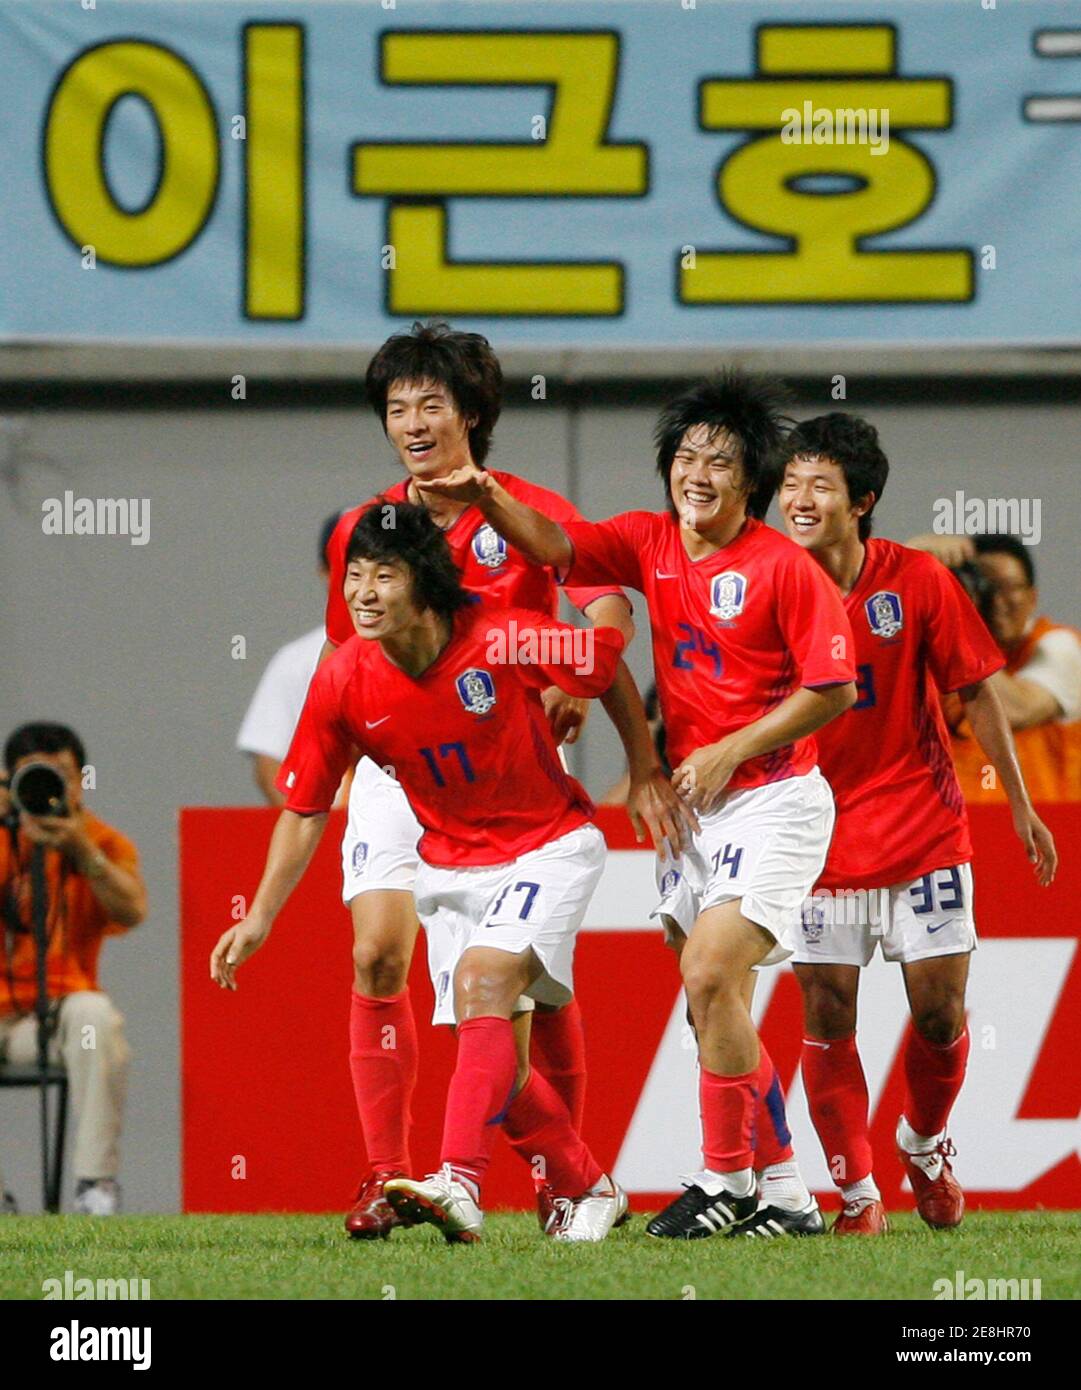 South Korea's Lee Keun-ho (17) celebrates with his teammates after scoring a goal against Uzbekistan during the final Asian qualifying round for soccer in the 2008 Beijing Olympic Games, at the World Cup stadium in Seoul, August 22, 2007. The banner in the background reads: 'Lee Keun-ho'.  REUTERS/Jo Yong-Hak (SOUTH KOREA) Stock Photo